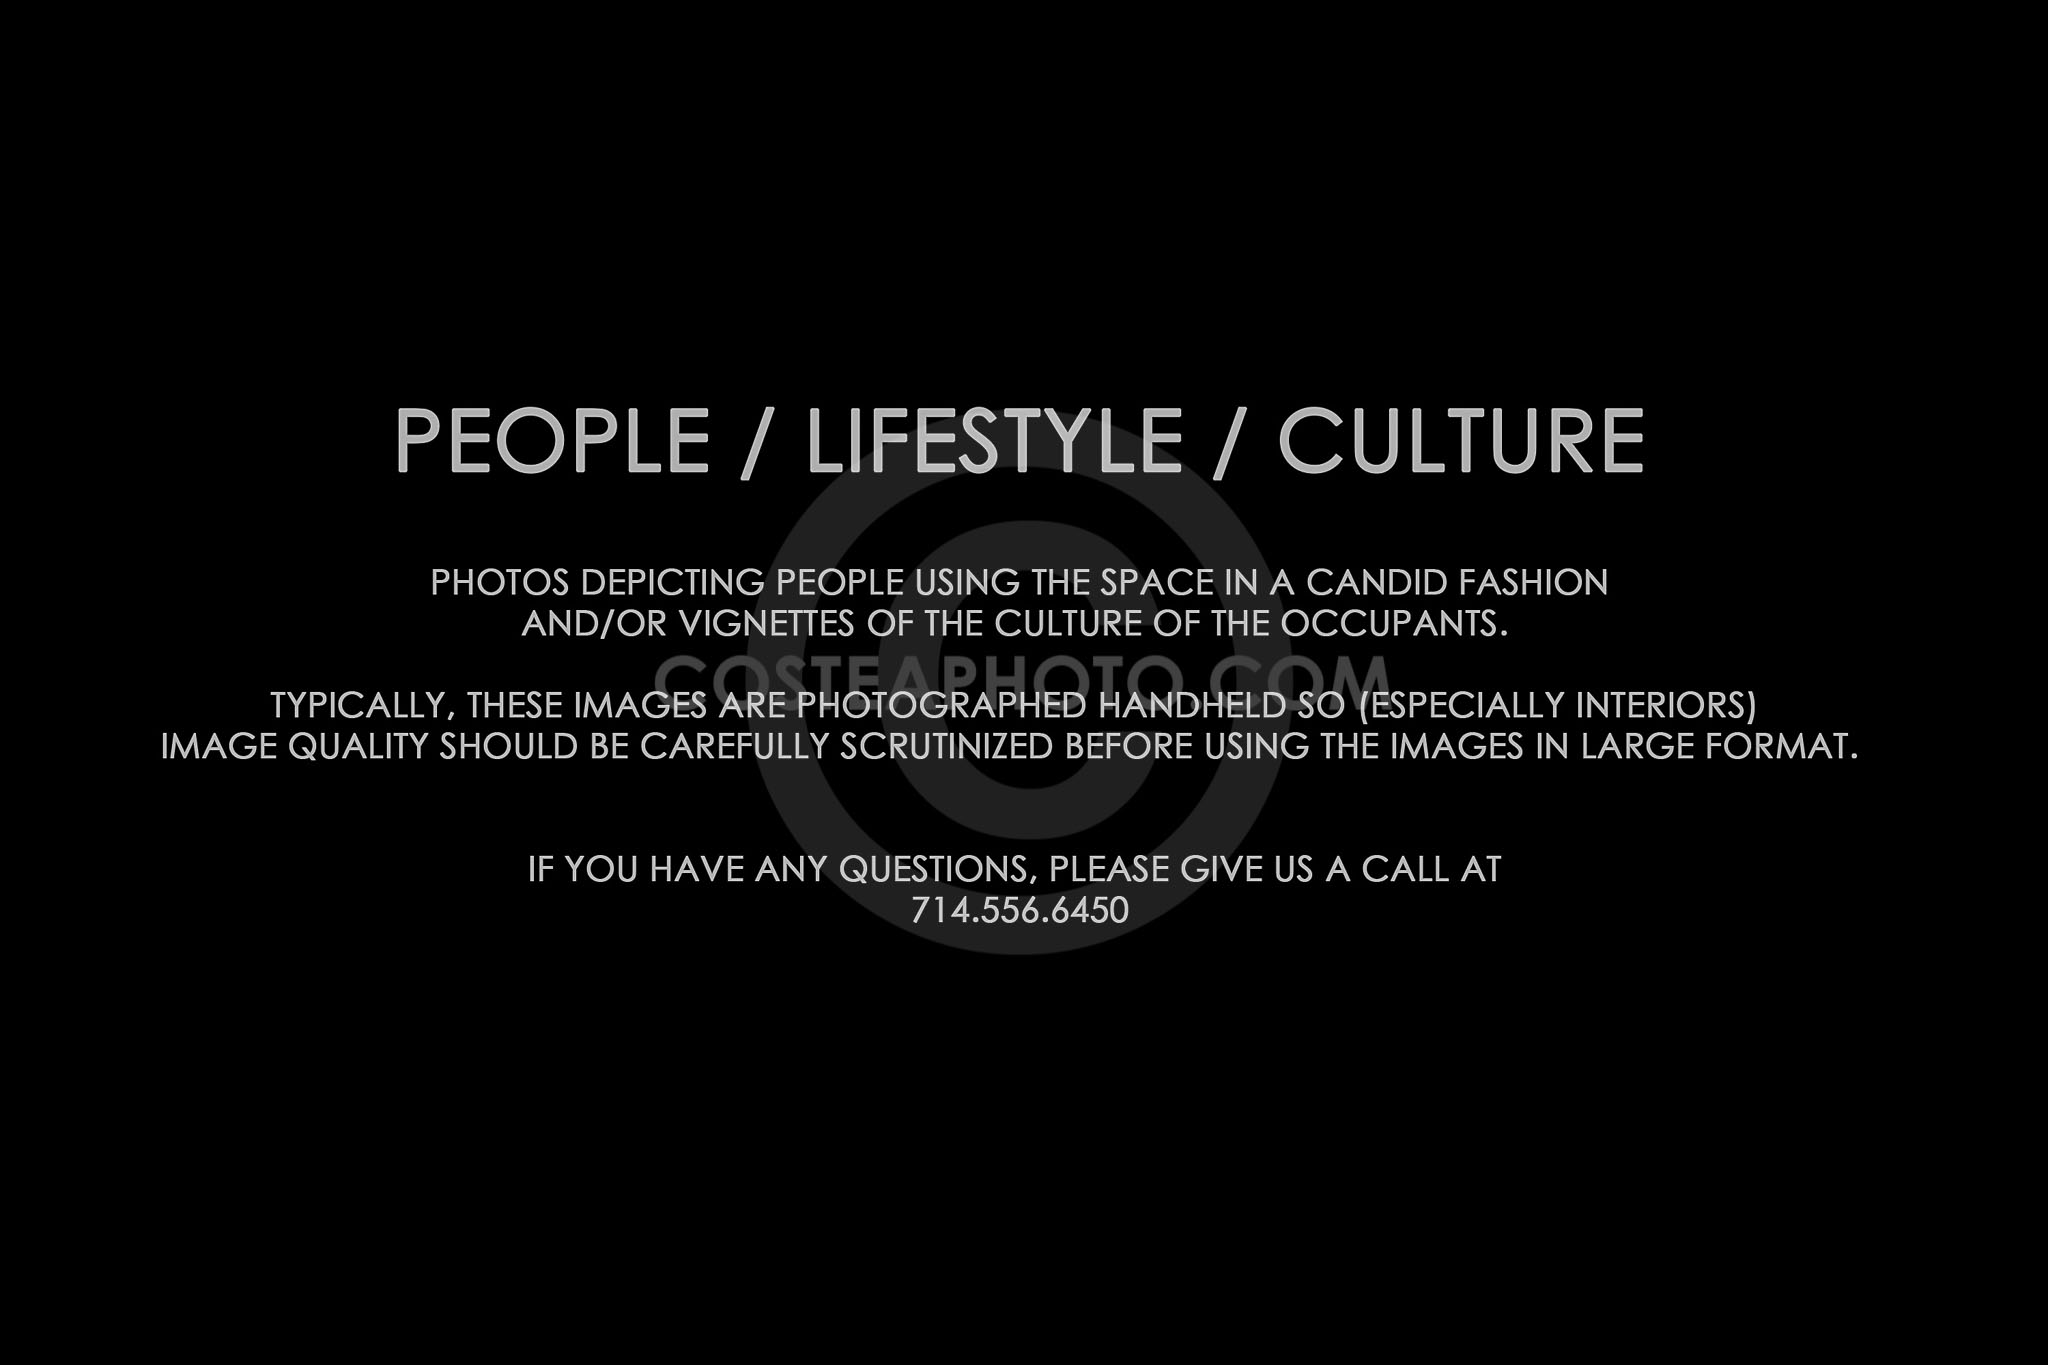 (070) TITLE PAGE - PEOPLE LIFESTYLE